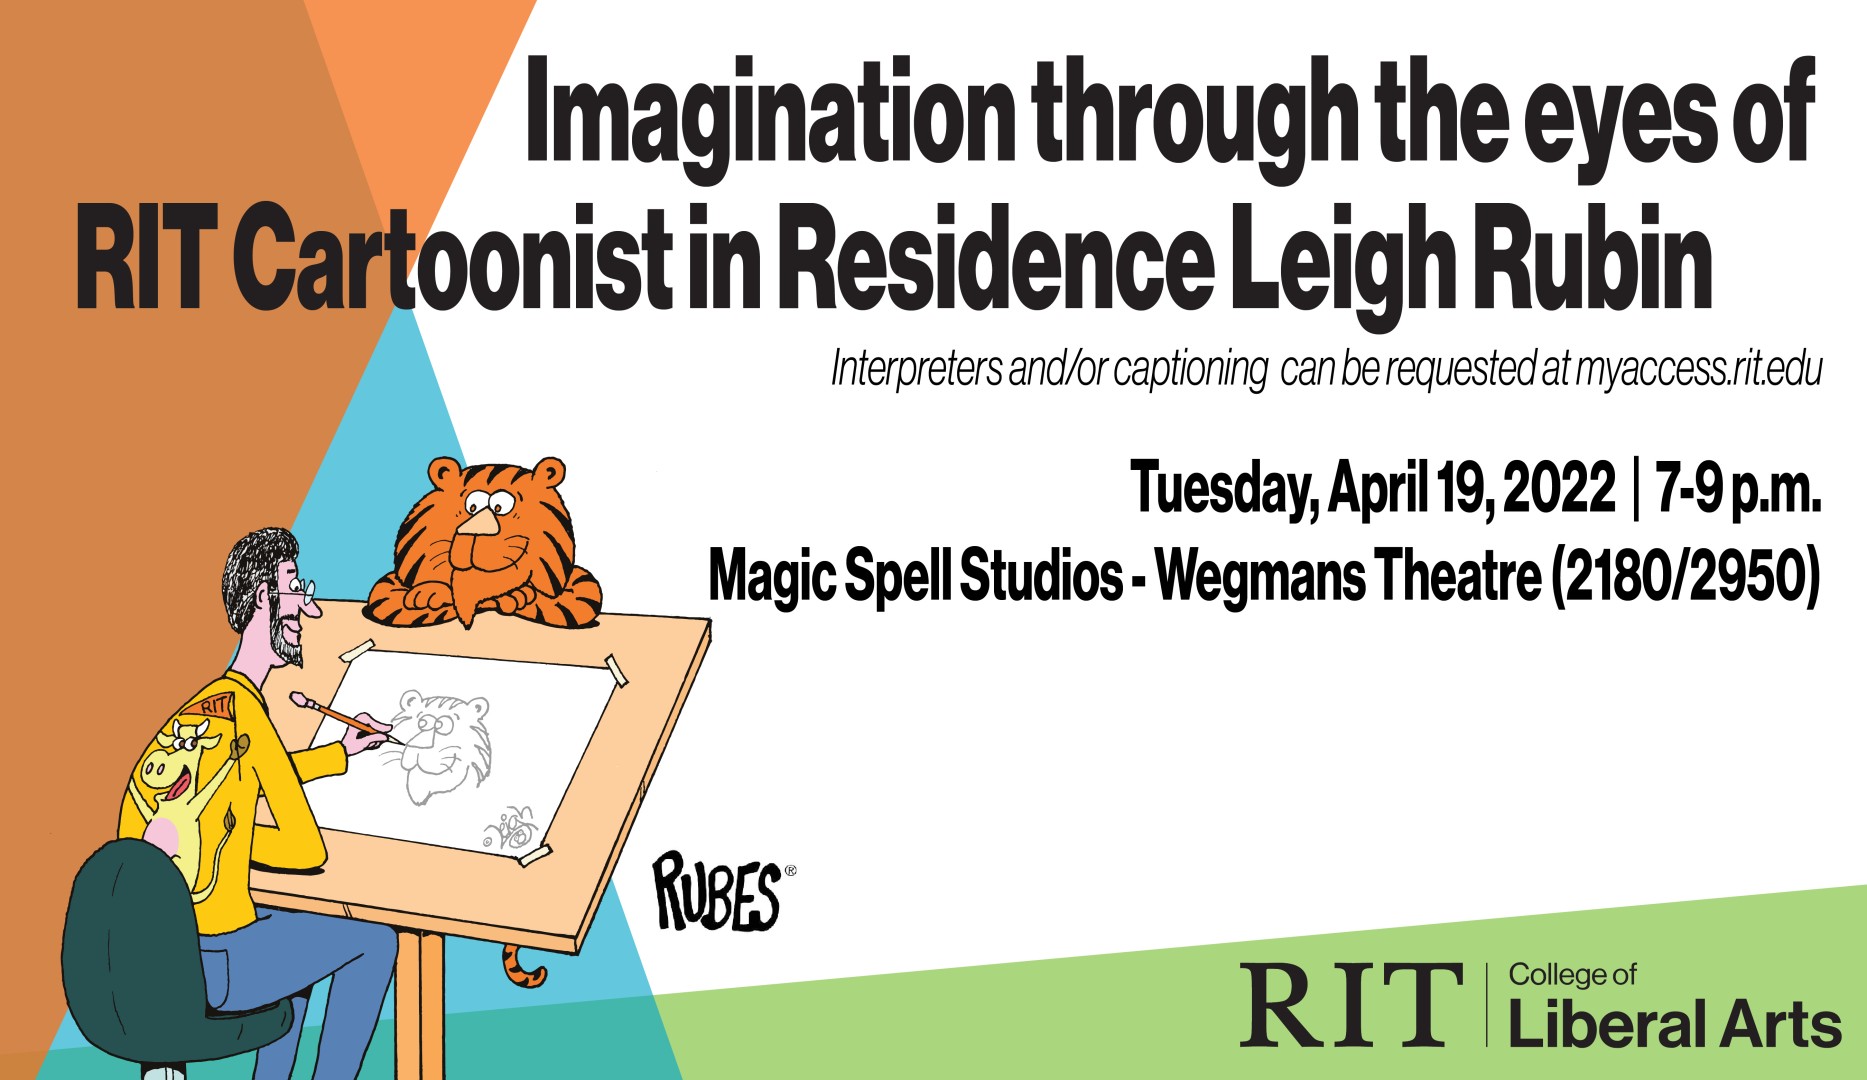 Event poster for Imagination through the eyes of RIT Cartoonist in Residence Leigh Rubin